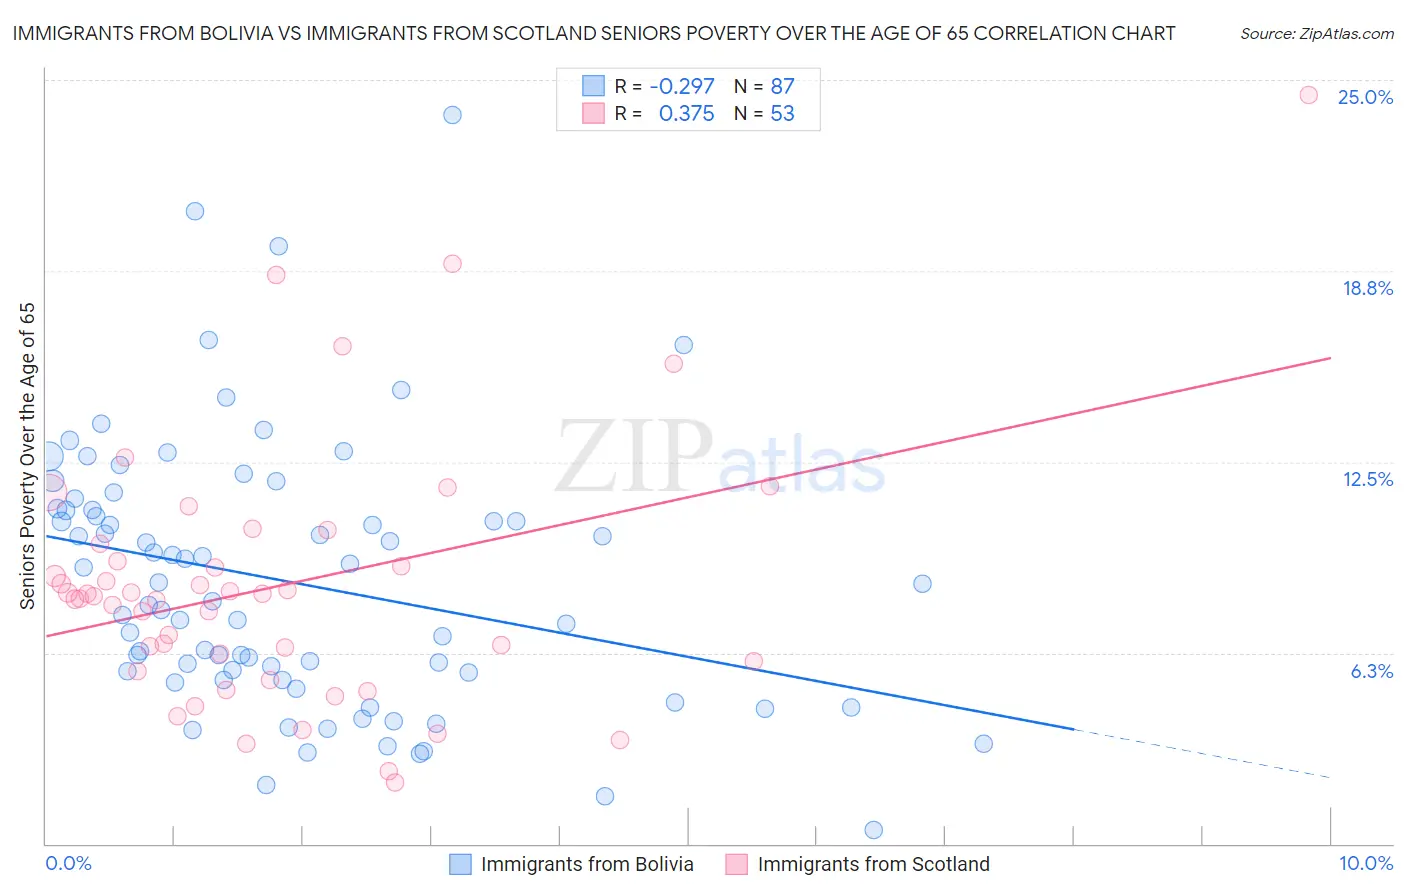 Immigrants from Bolivia vs Immigrants from Scotland Seniors Poverty Over the Age of 65